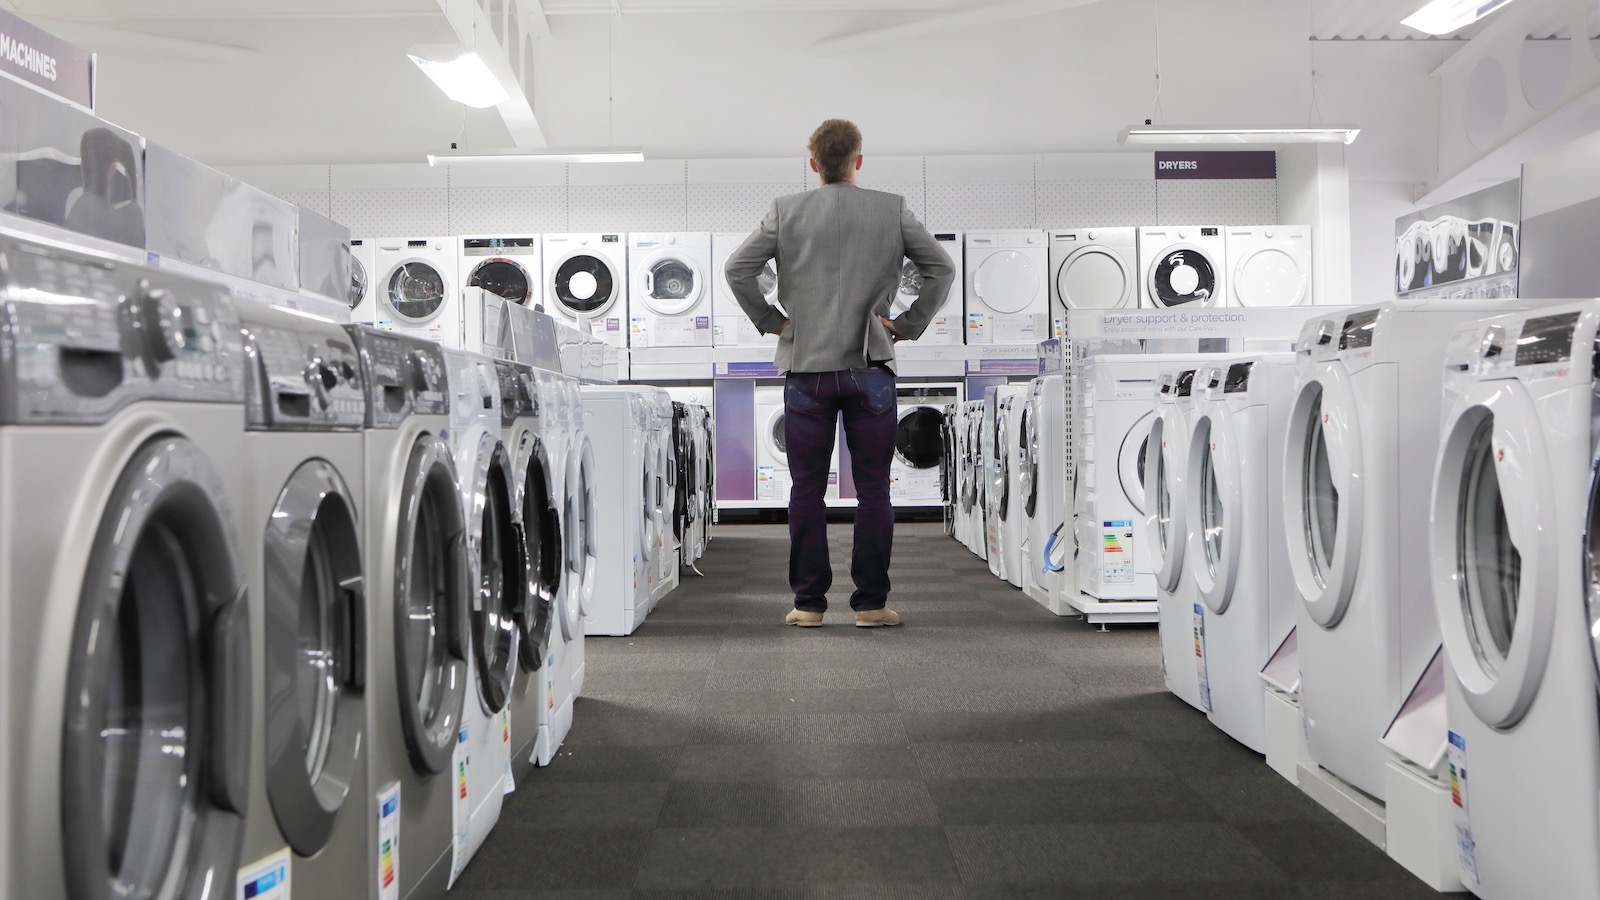 A man with his back to the camera considers a row of new washing machines and dryers in an appliance shop.